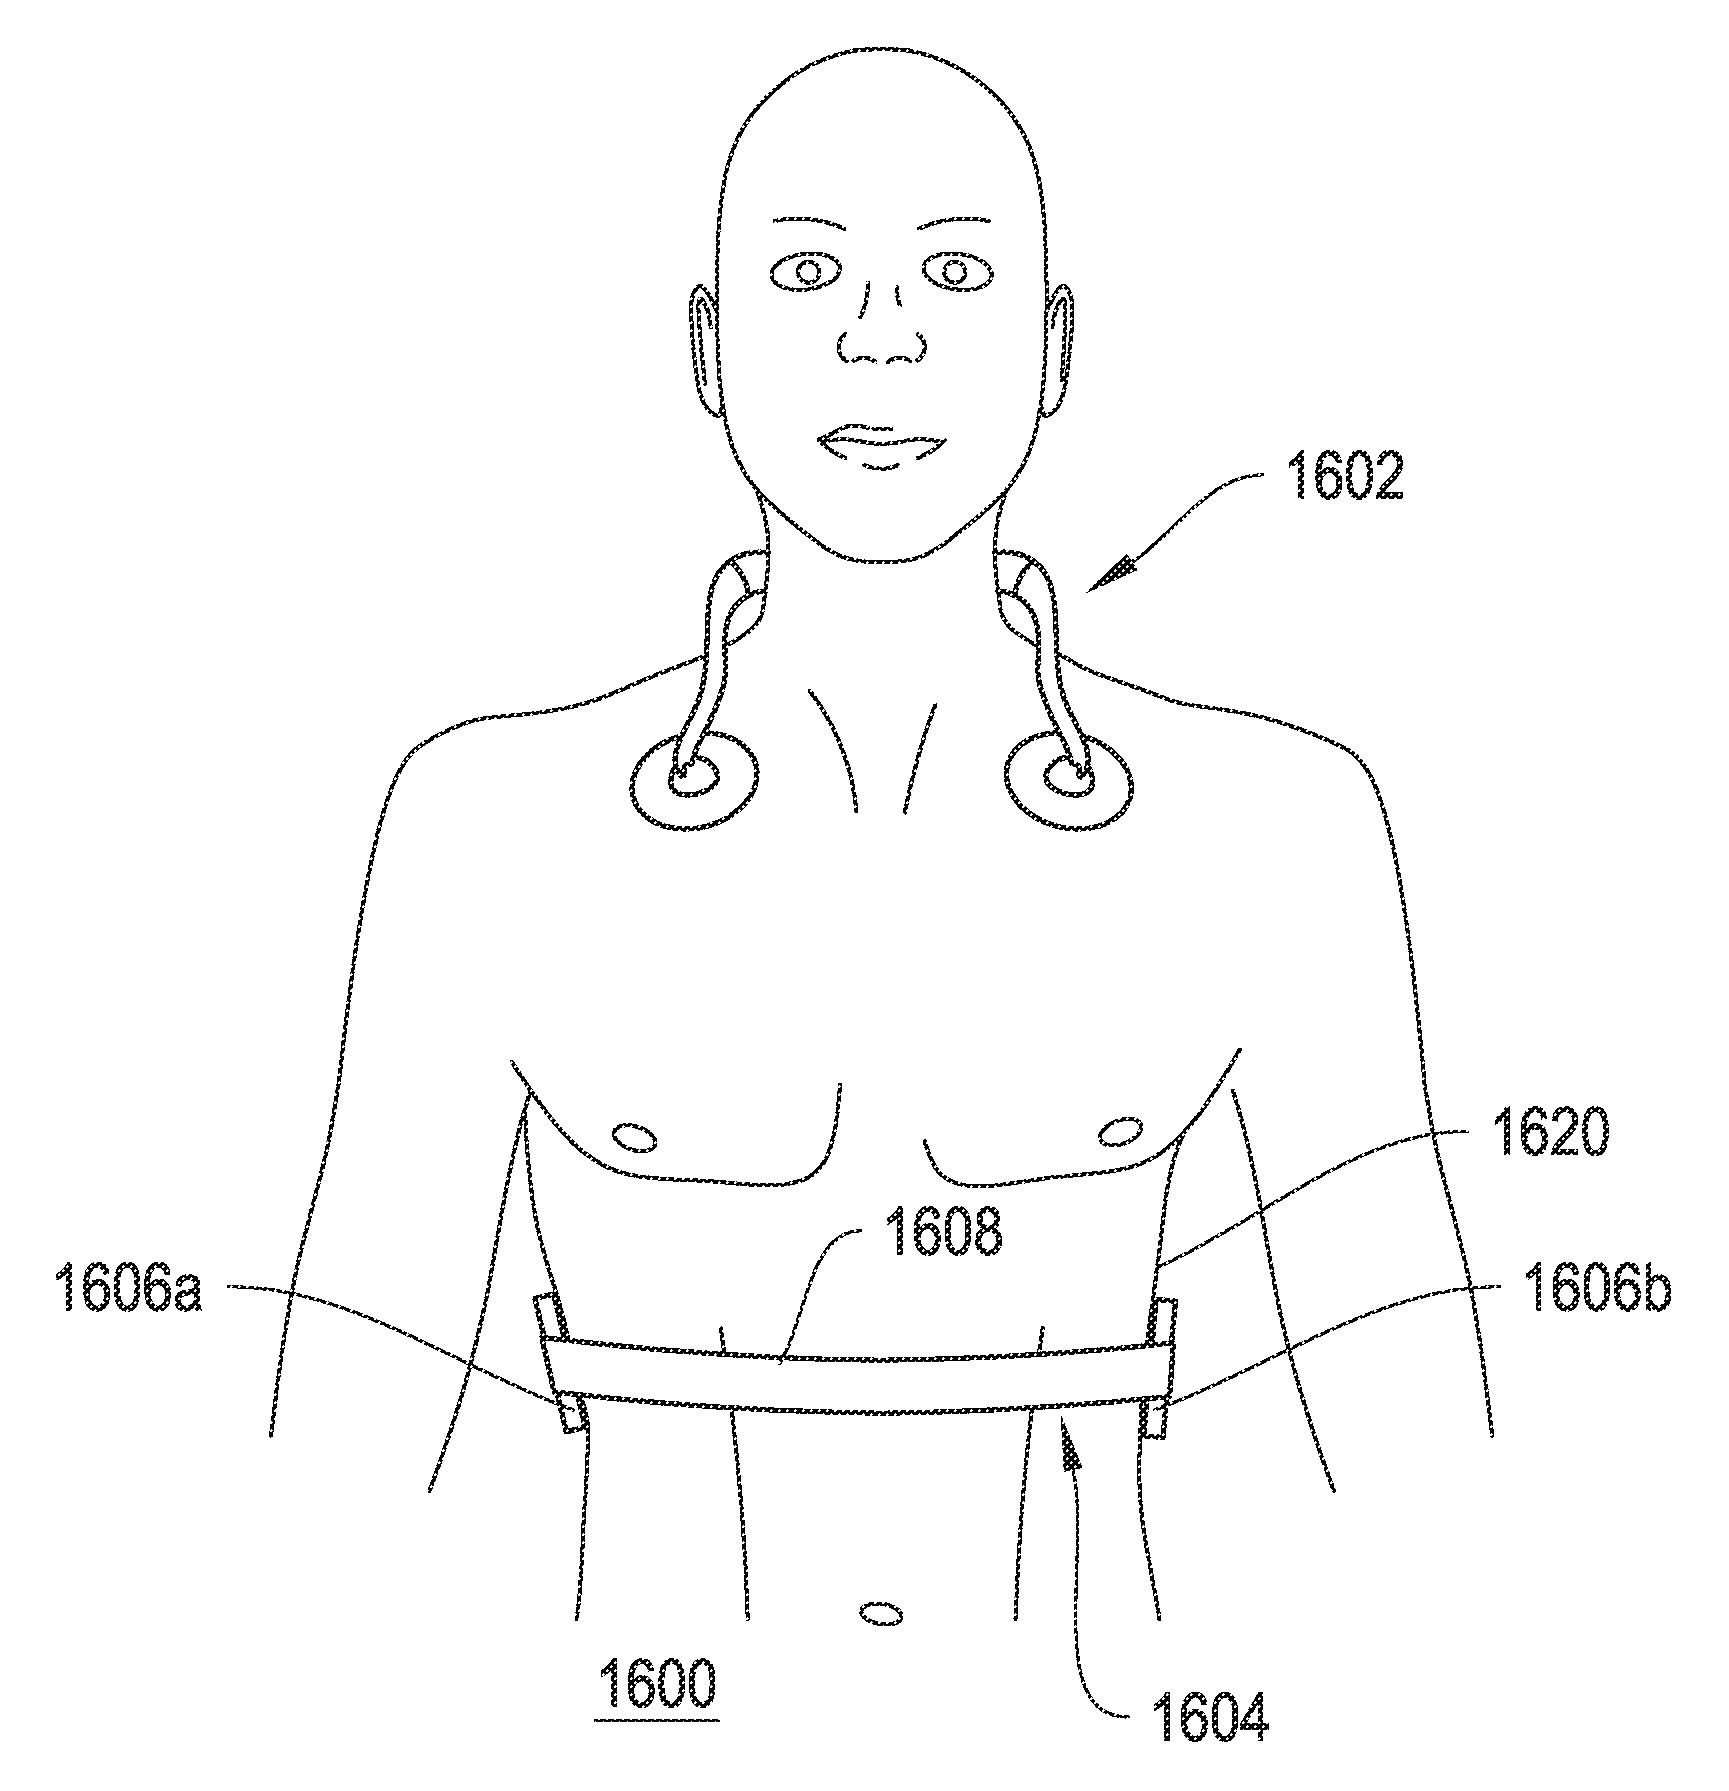 Systems and methods for haptic sound with motion tracking